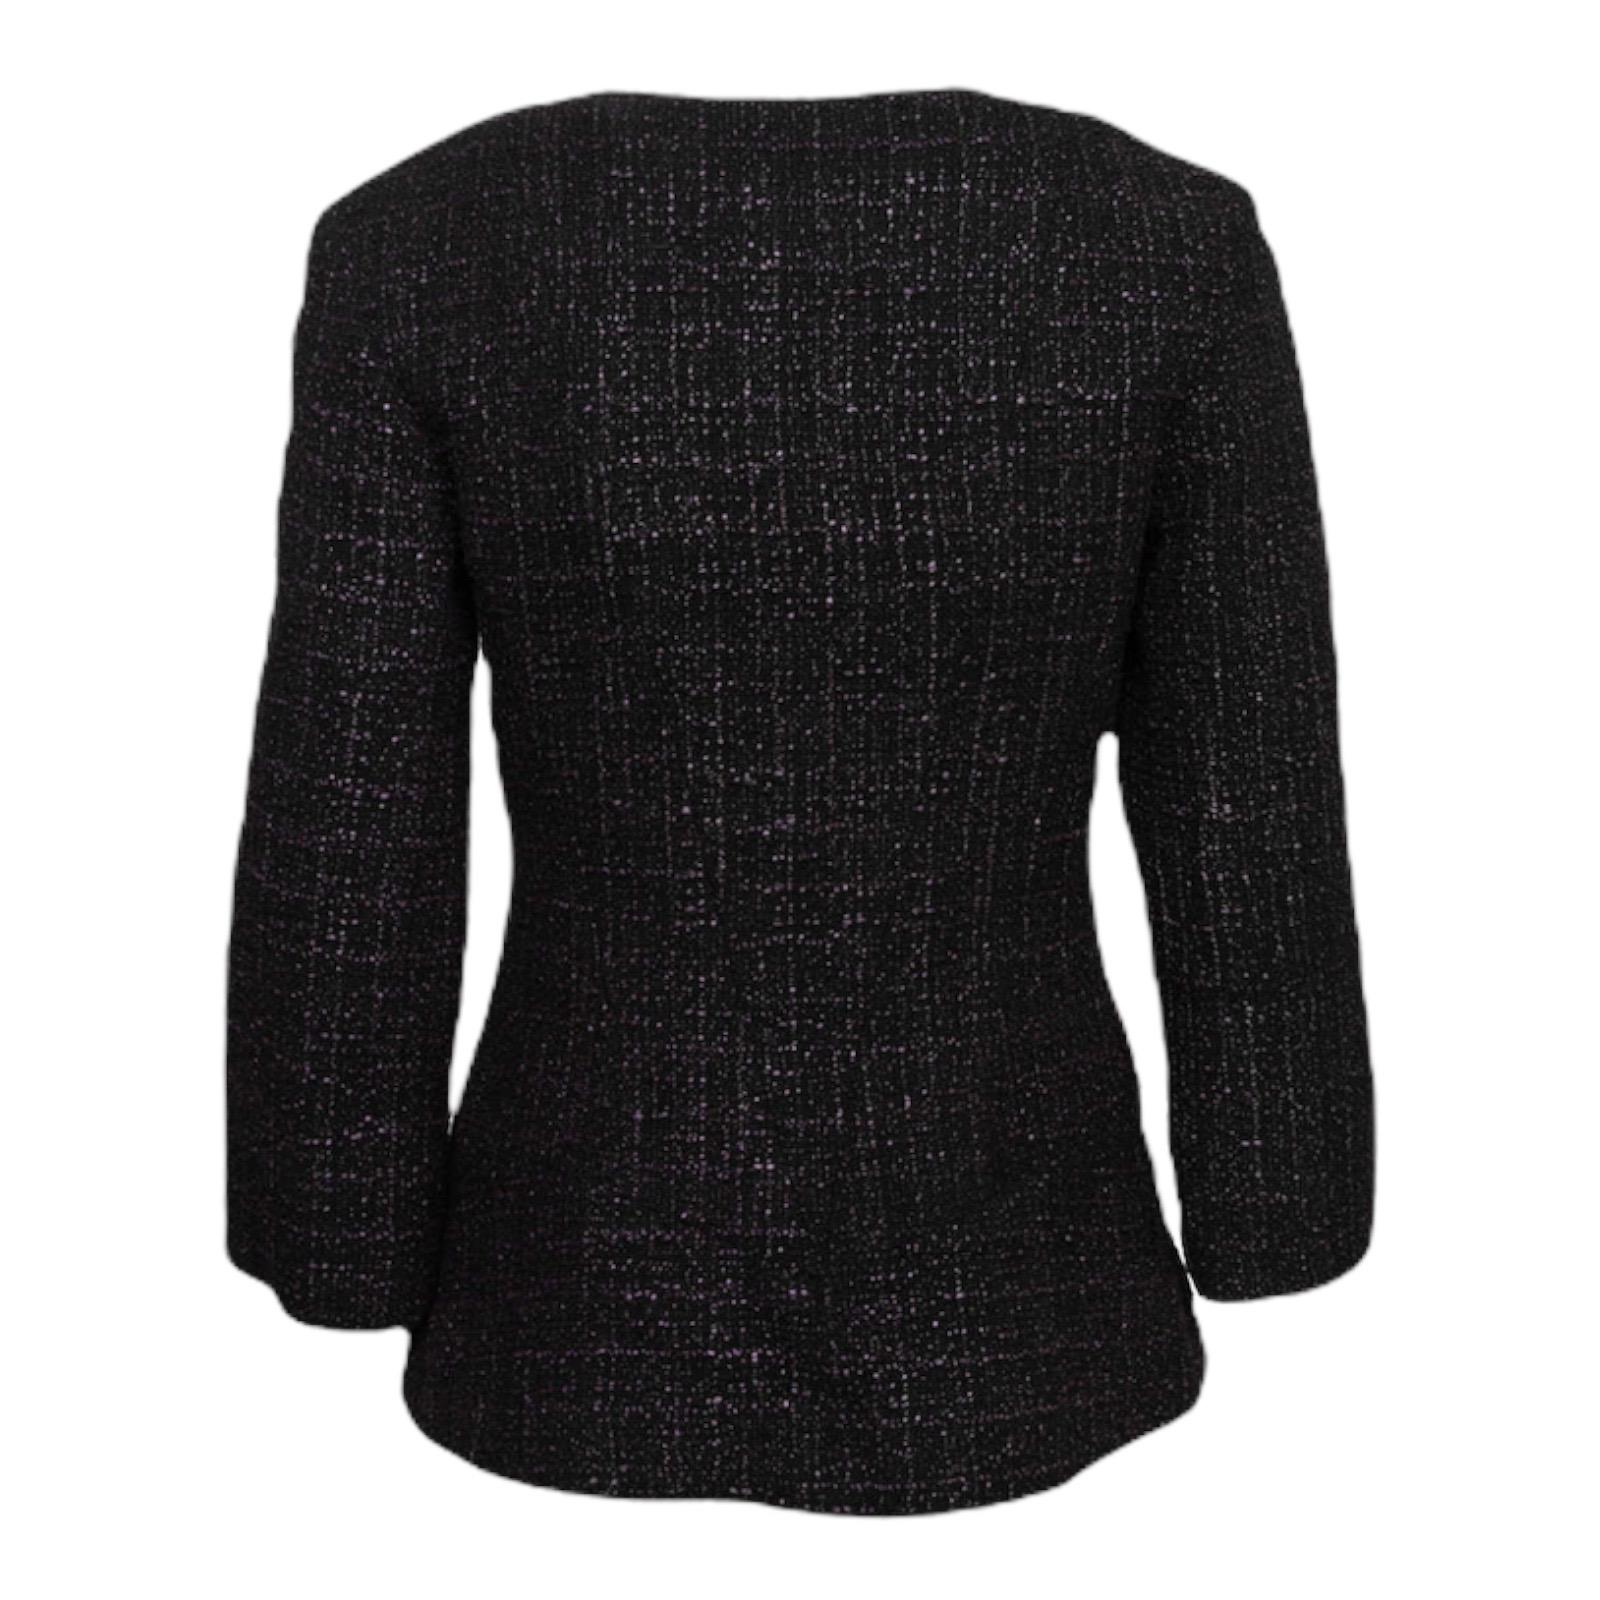 Beautiful CHANEL tweed jacket 
A true CHANEL signature item that will last you for many years
Fitted style, beautifully tailored
Two side pockets - still unopened
Wonderful color - perfect with your favourite pair of jeans or a colorful contrast